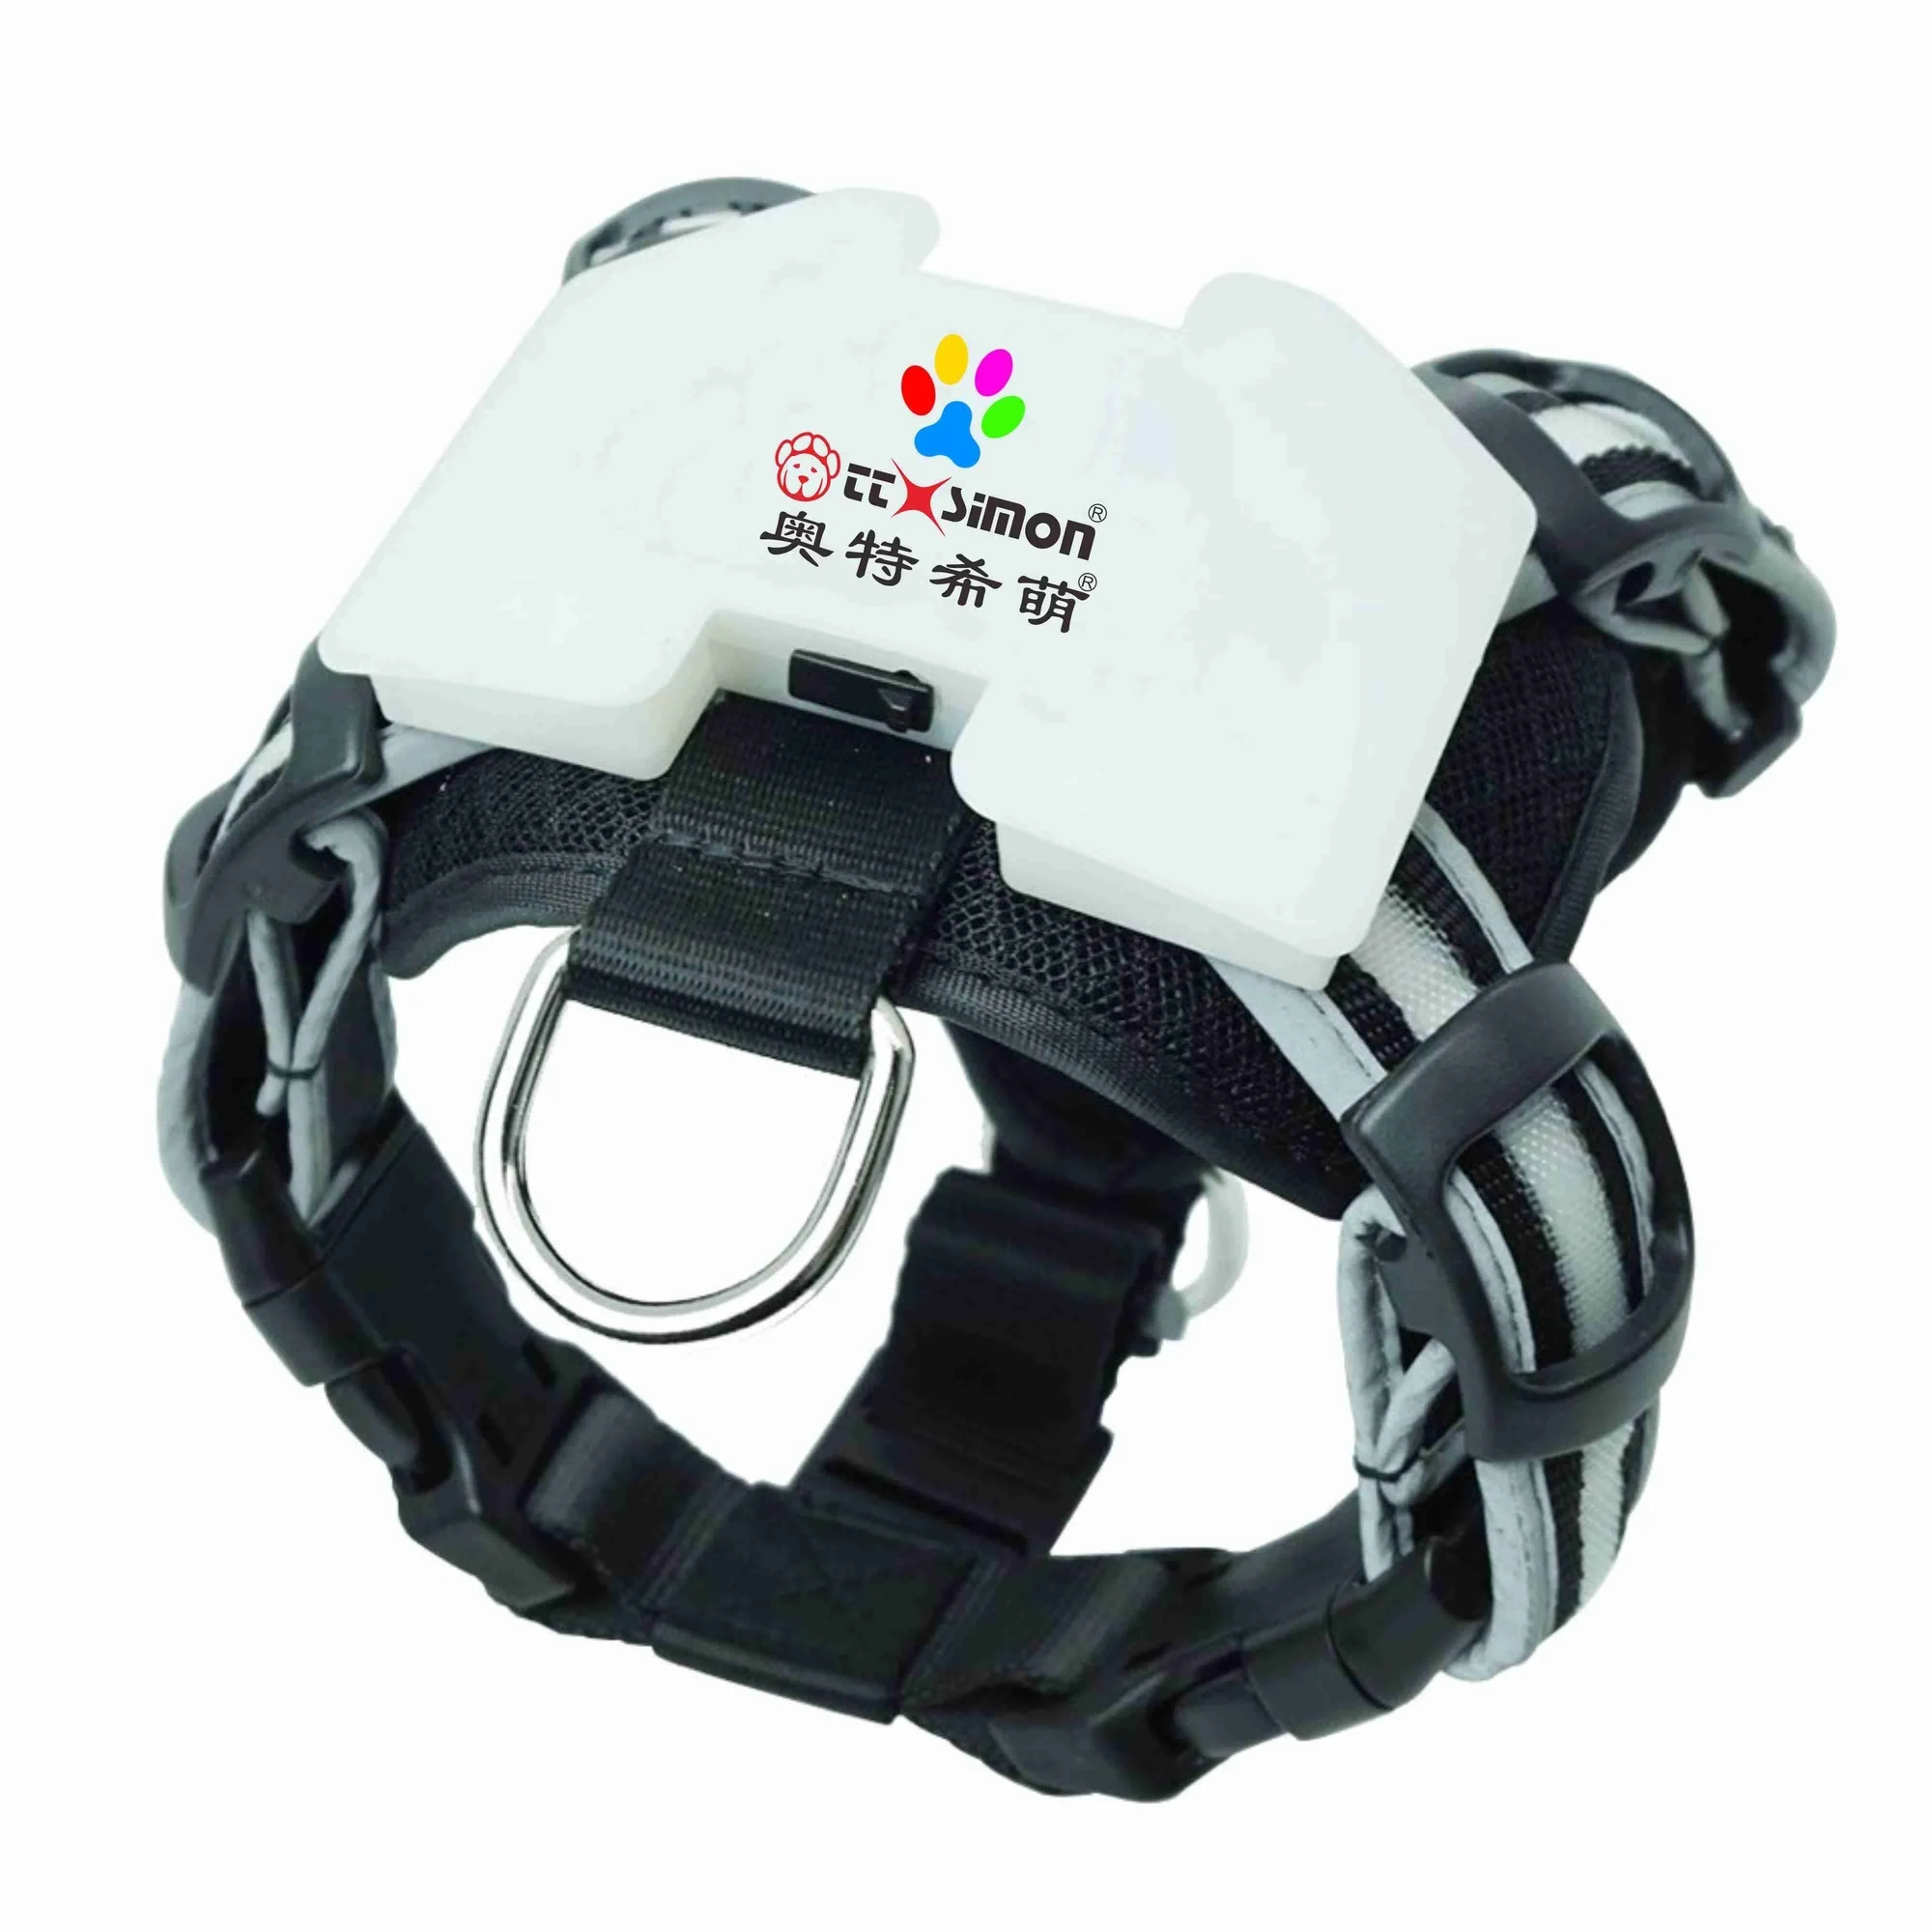 

for Simon Oem Large Dog with Private Label Dog Harness Reflective Lights Personalized Nylon Quick Release Padded Cc All Seasons